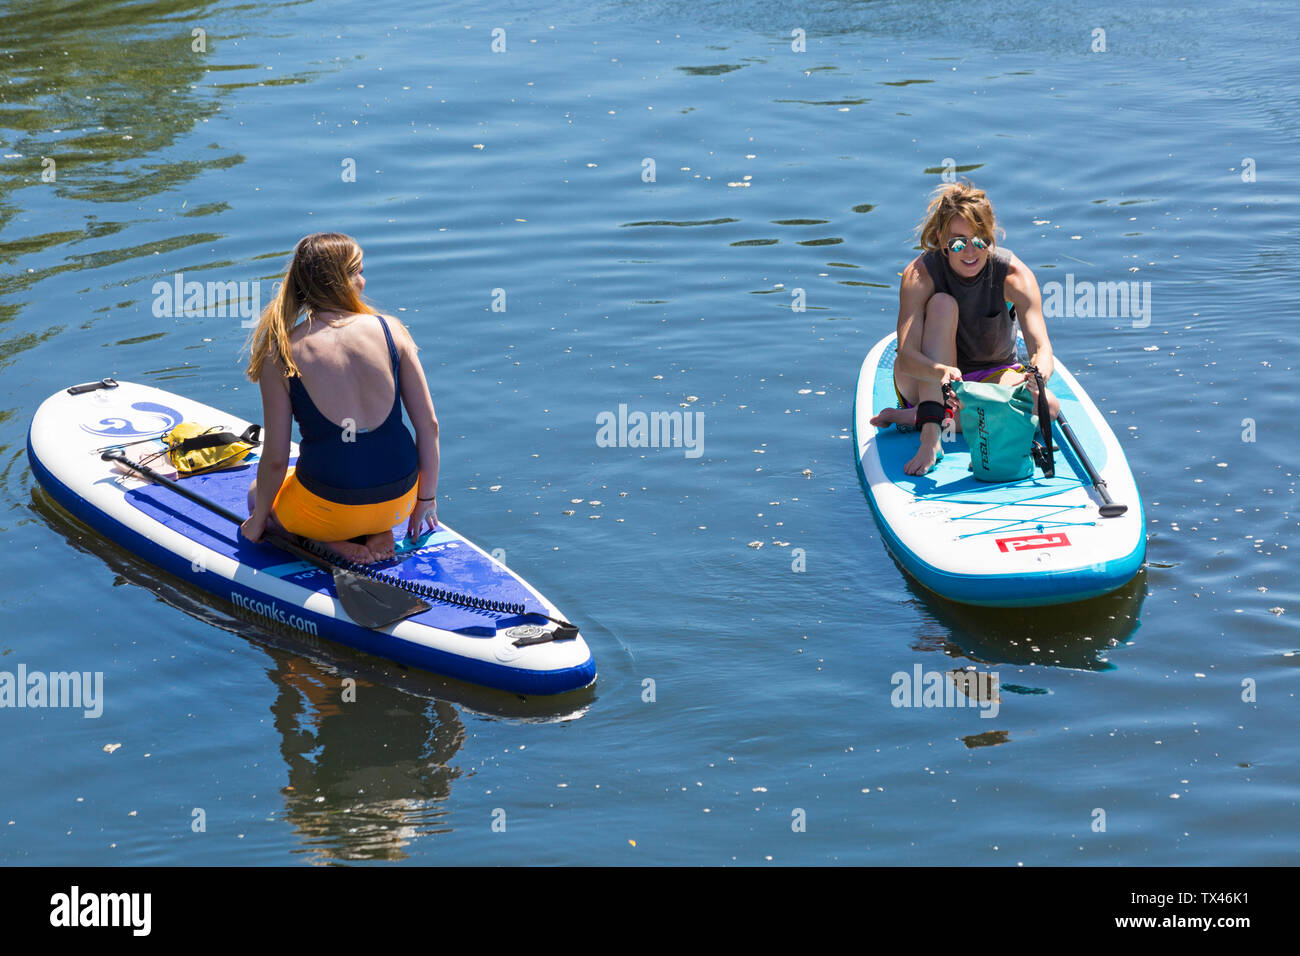 Woman paddleboarders paddle boarders relaxing on paddleboards paddle boards on Dorset Dinghy Day at River Stour, Iford, Dorset UK in June Stock Photo